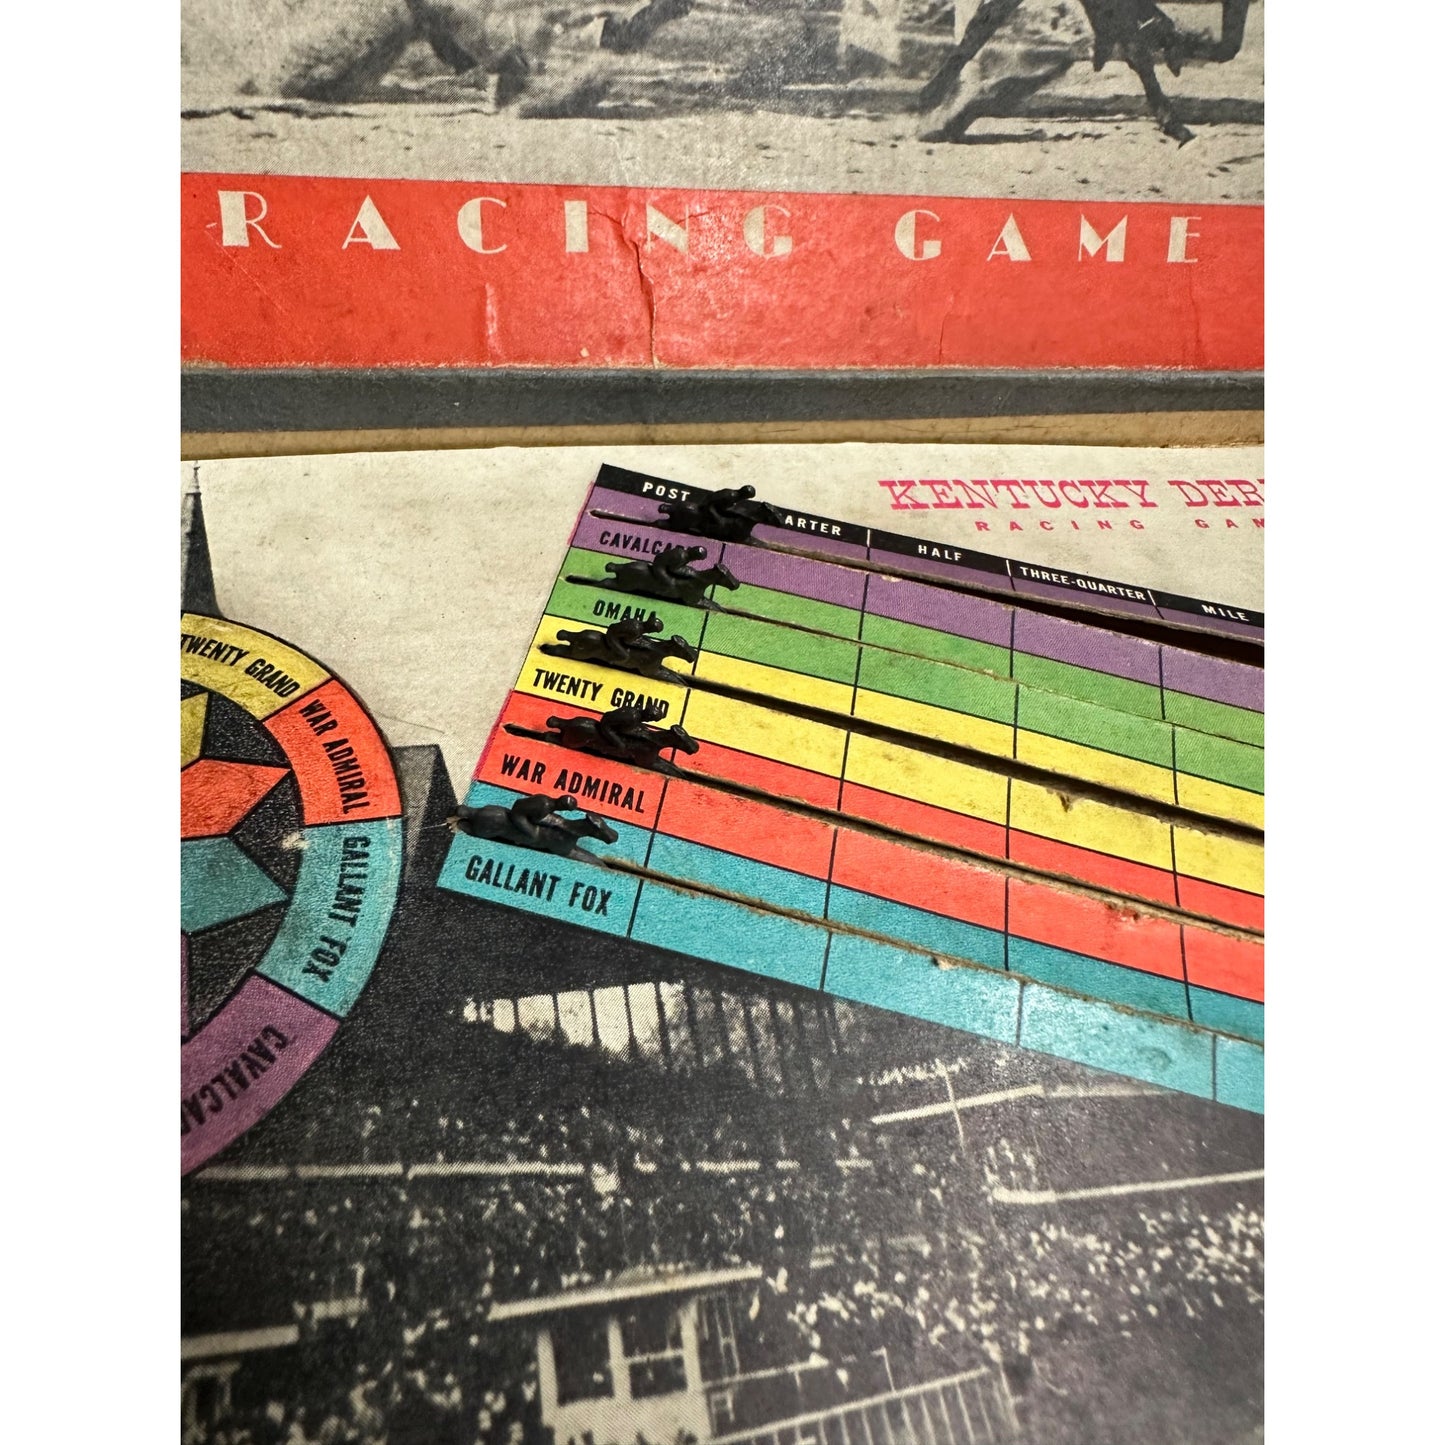 VINTAGE 1938 KENTUCKY DERBY RACING GAME REX MANUFACTURING CO - COMPLETE